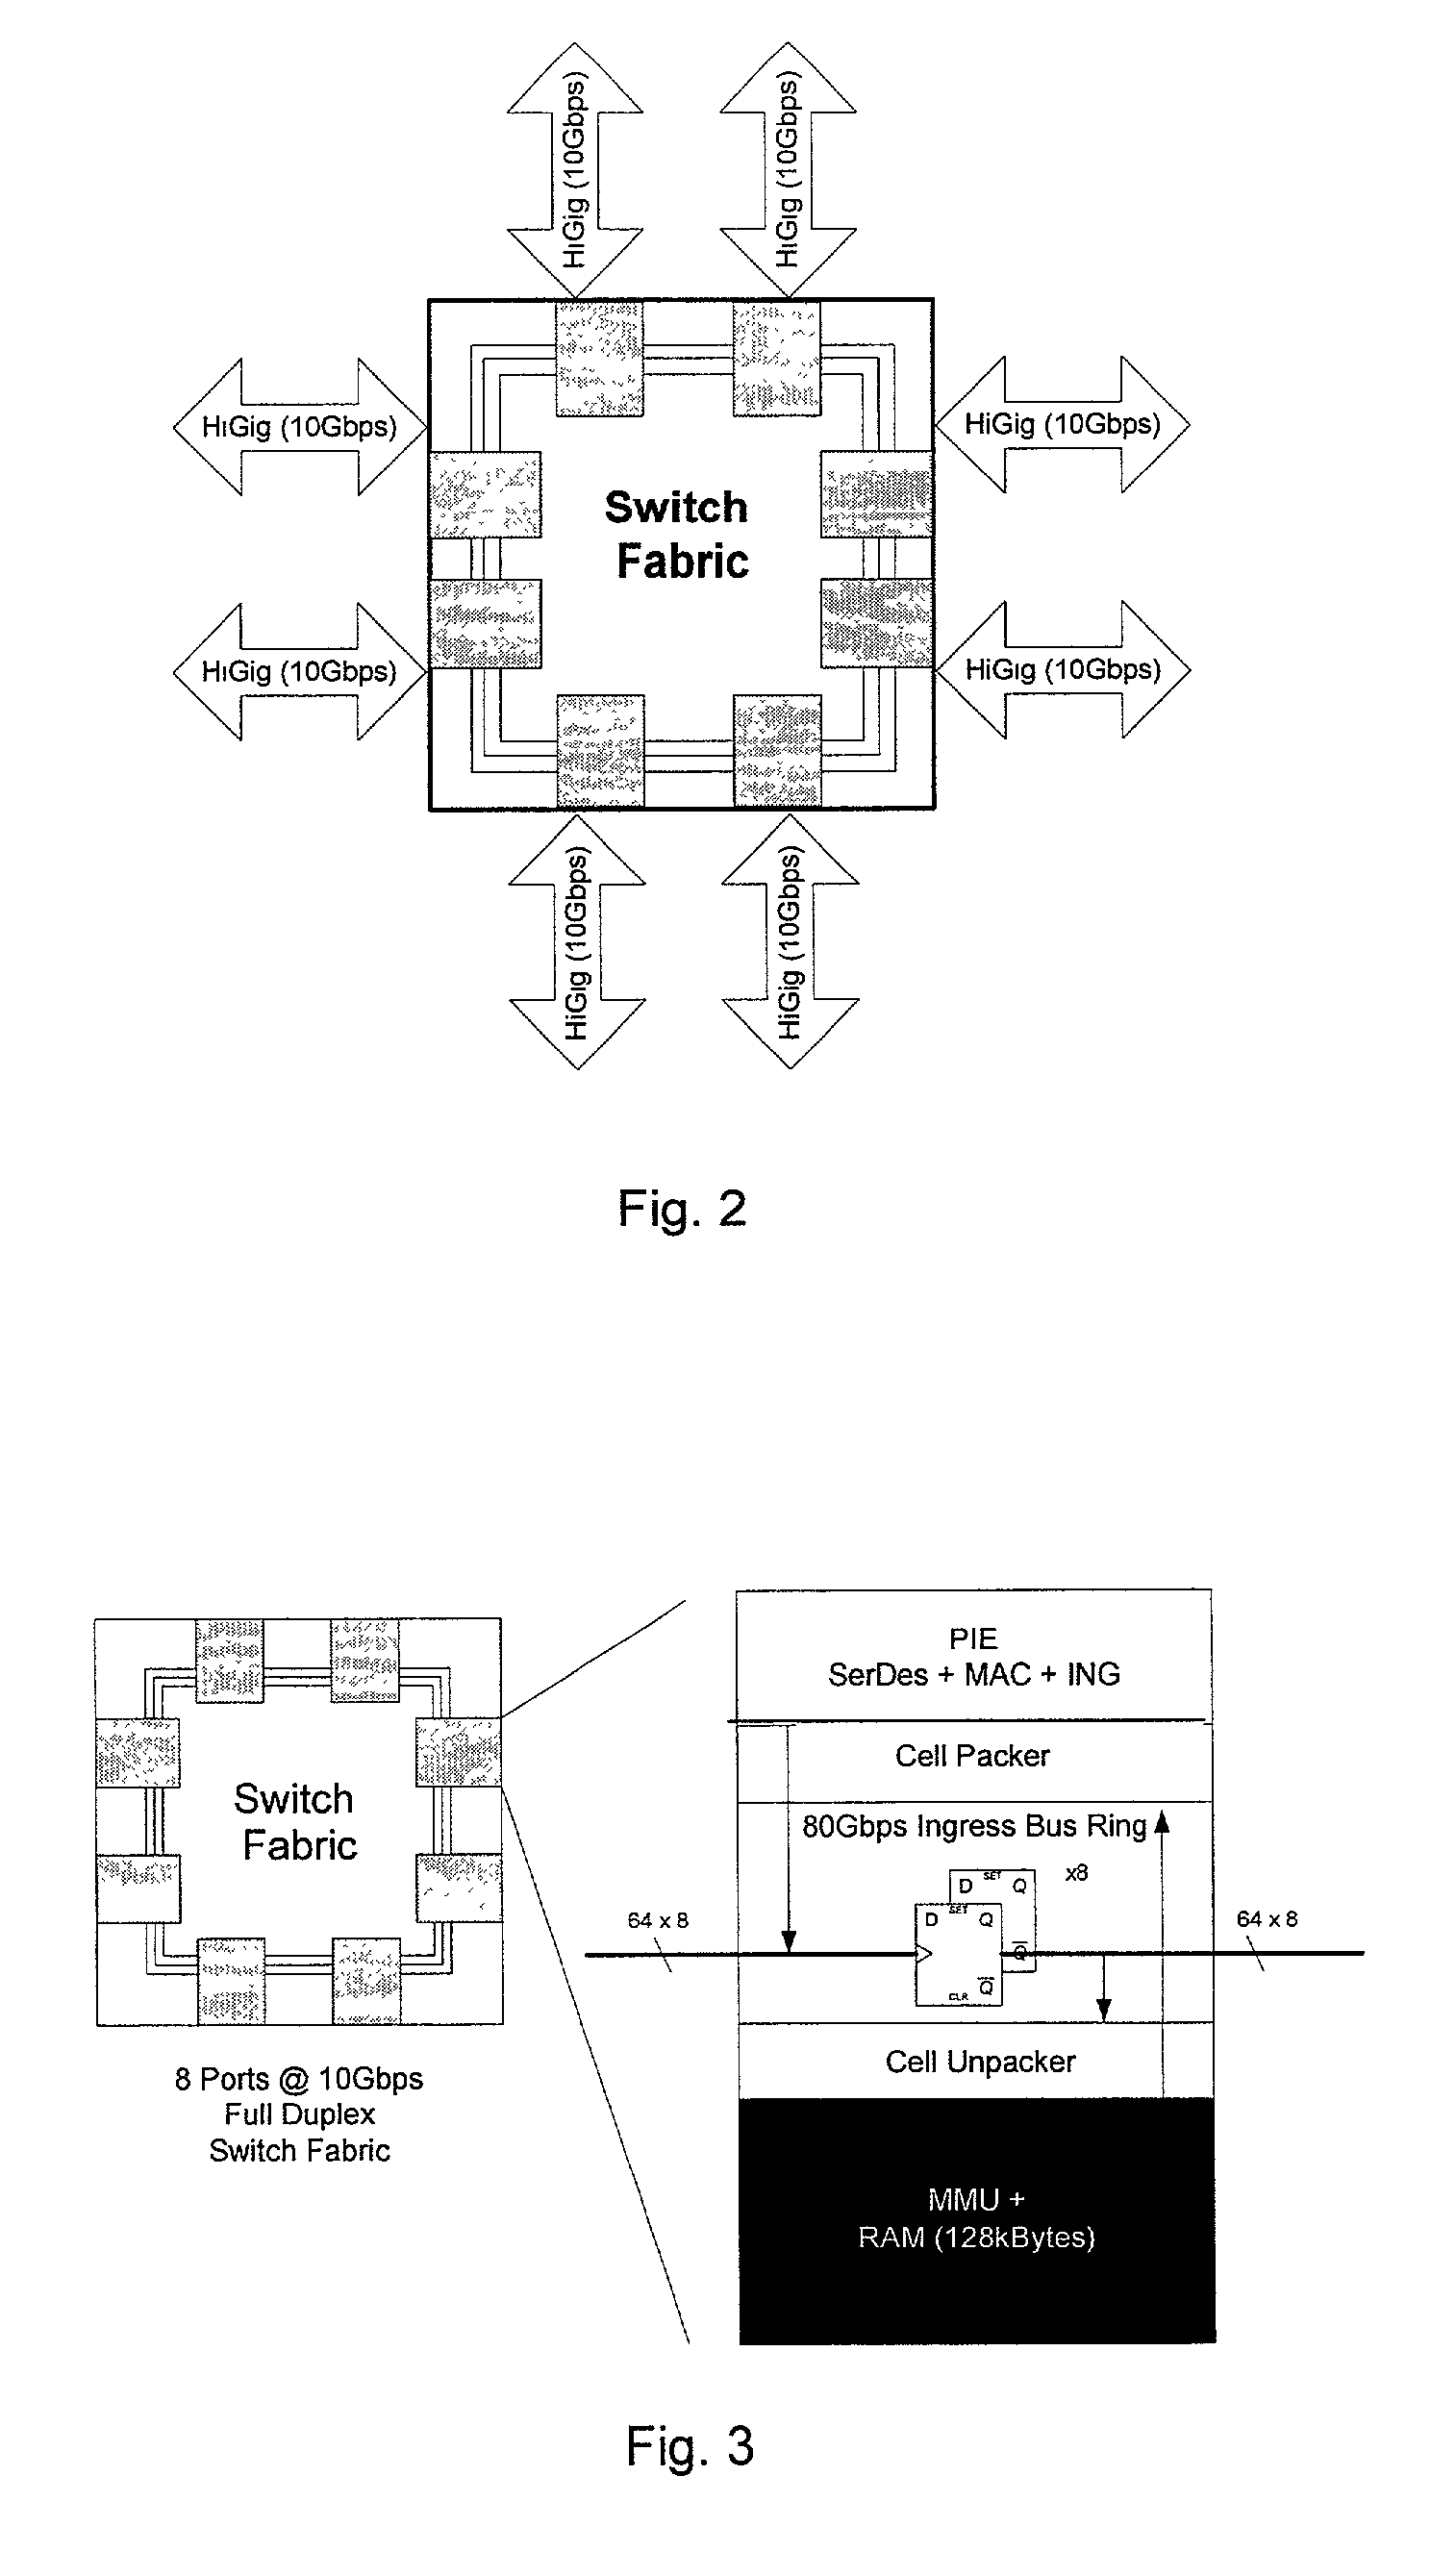 Switch fabric with memory management unit for improved flow control